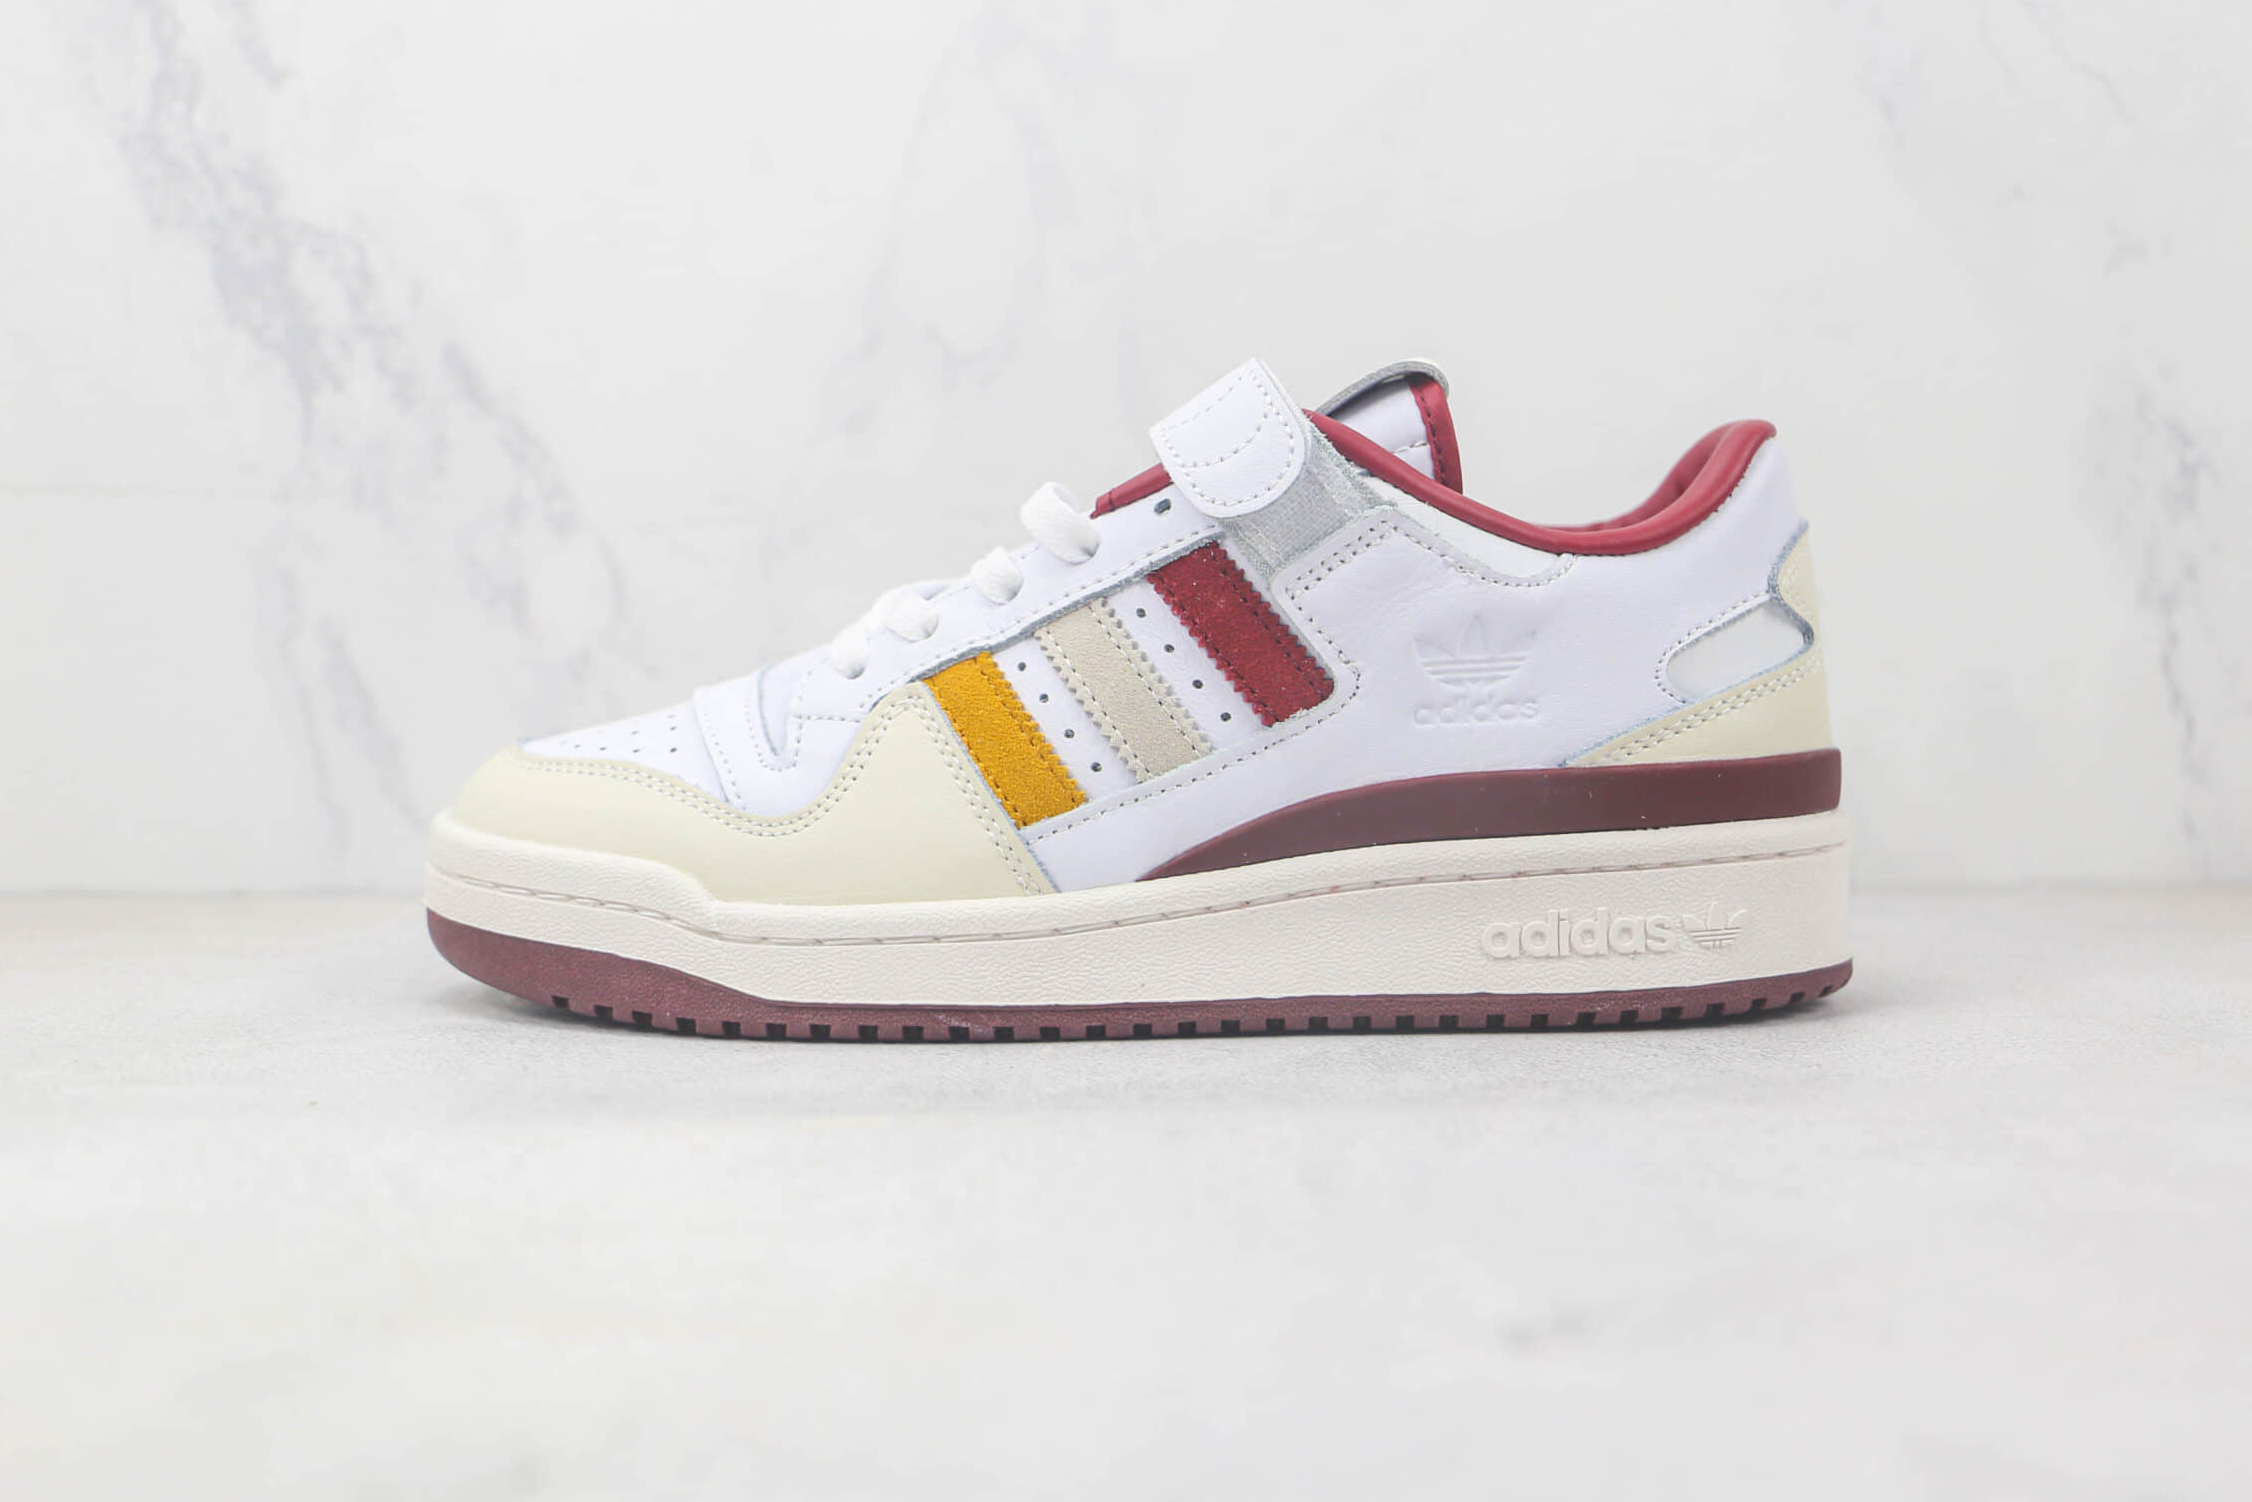 Adidas END. x Forum Low 'Varsity - Burgundy' HR1525 – Premium Sneakers for Style Enthusiasts